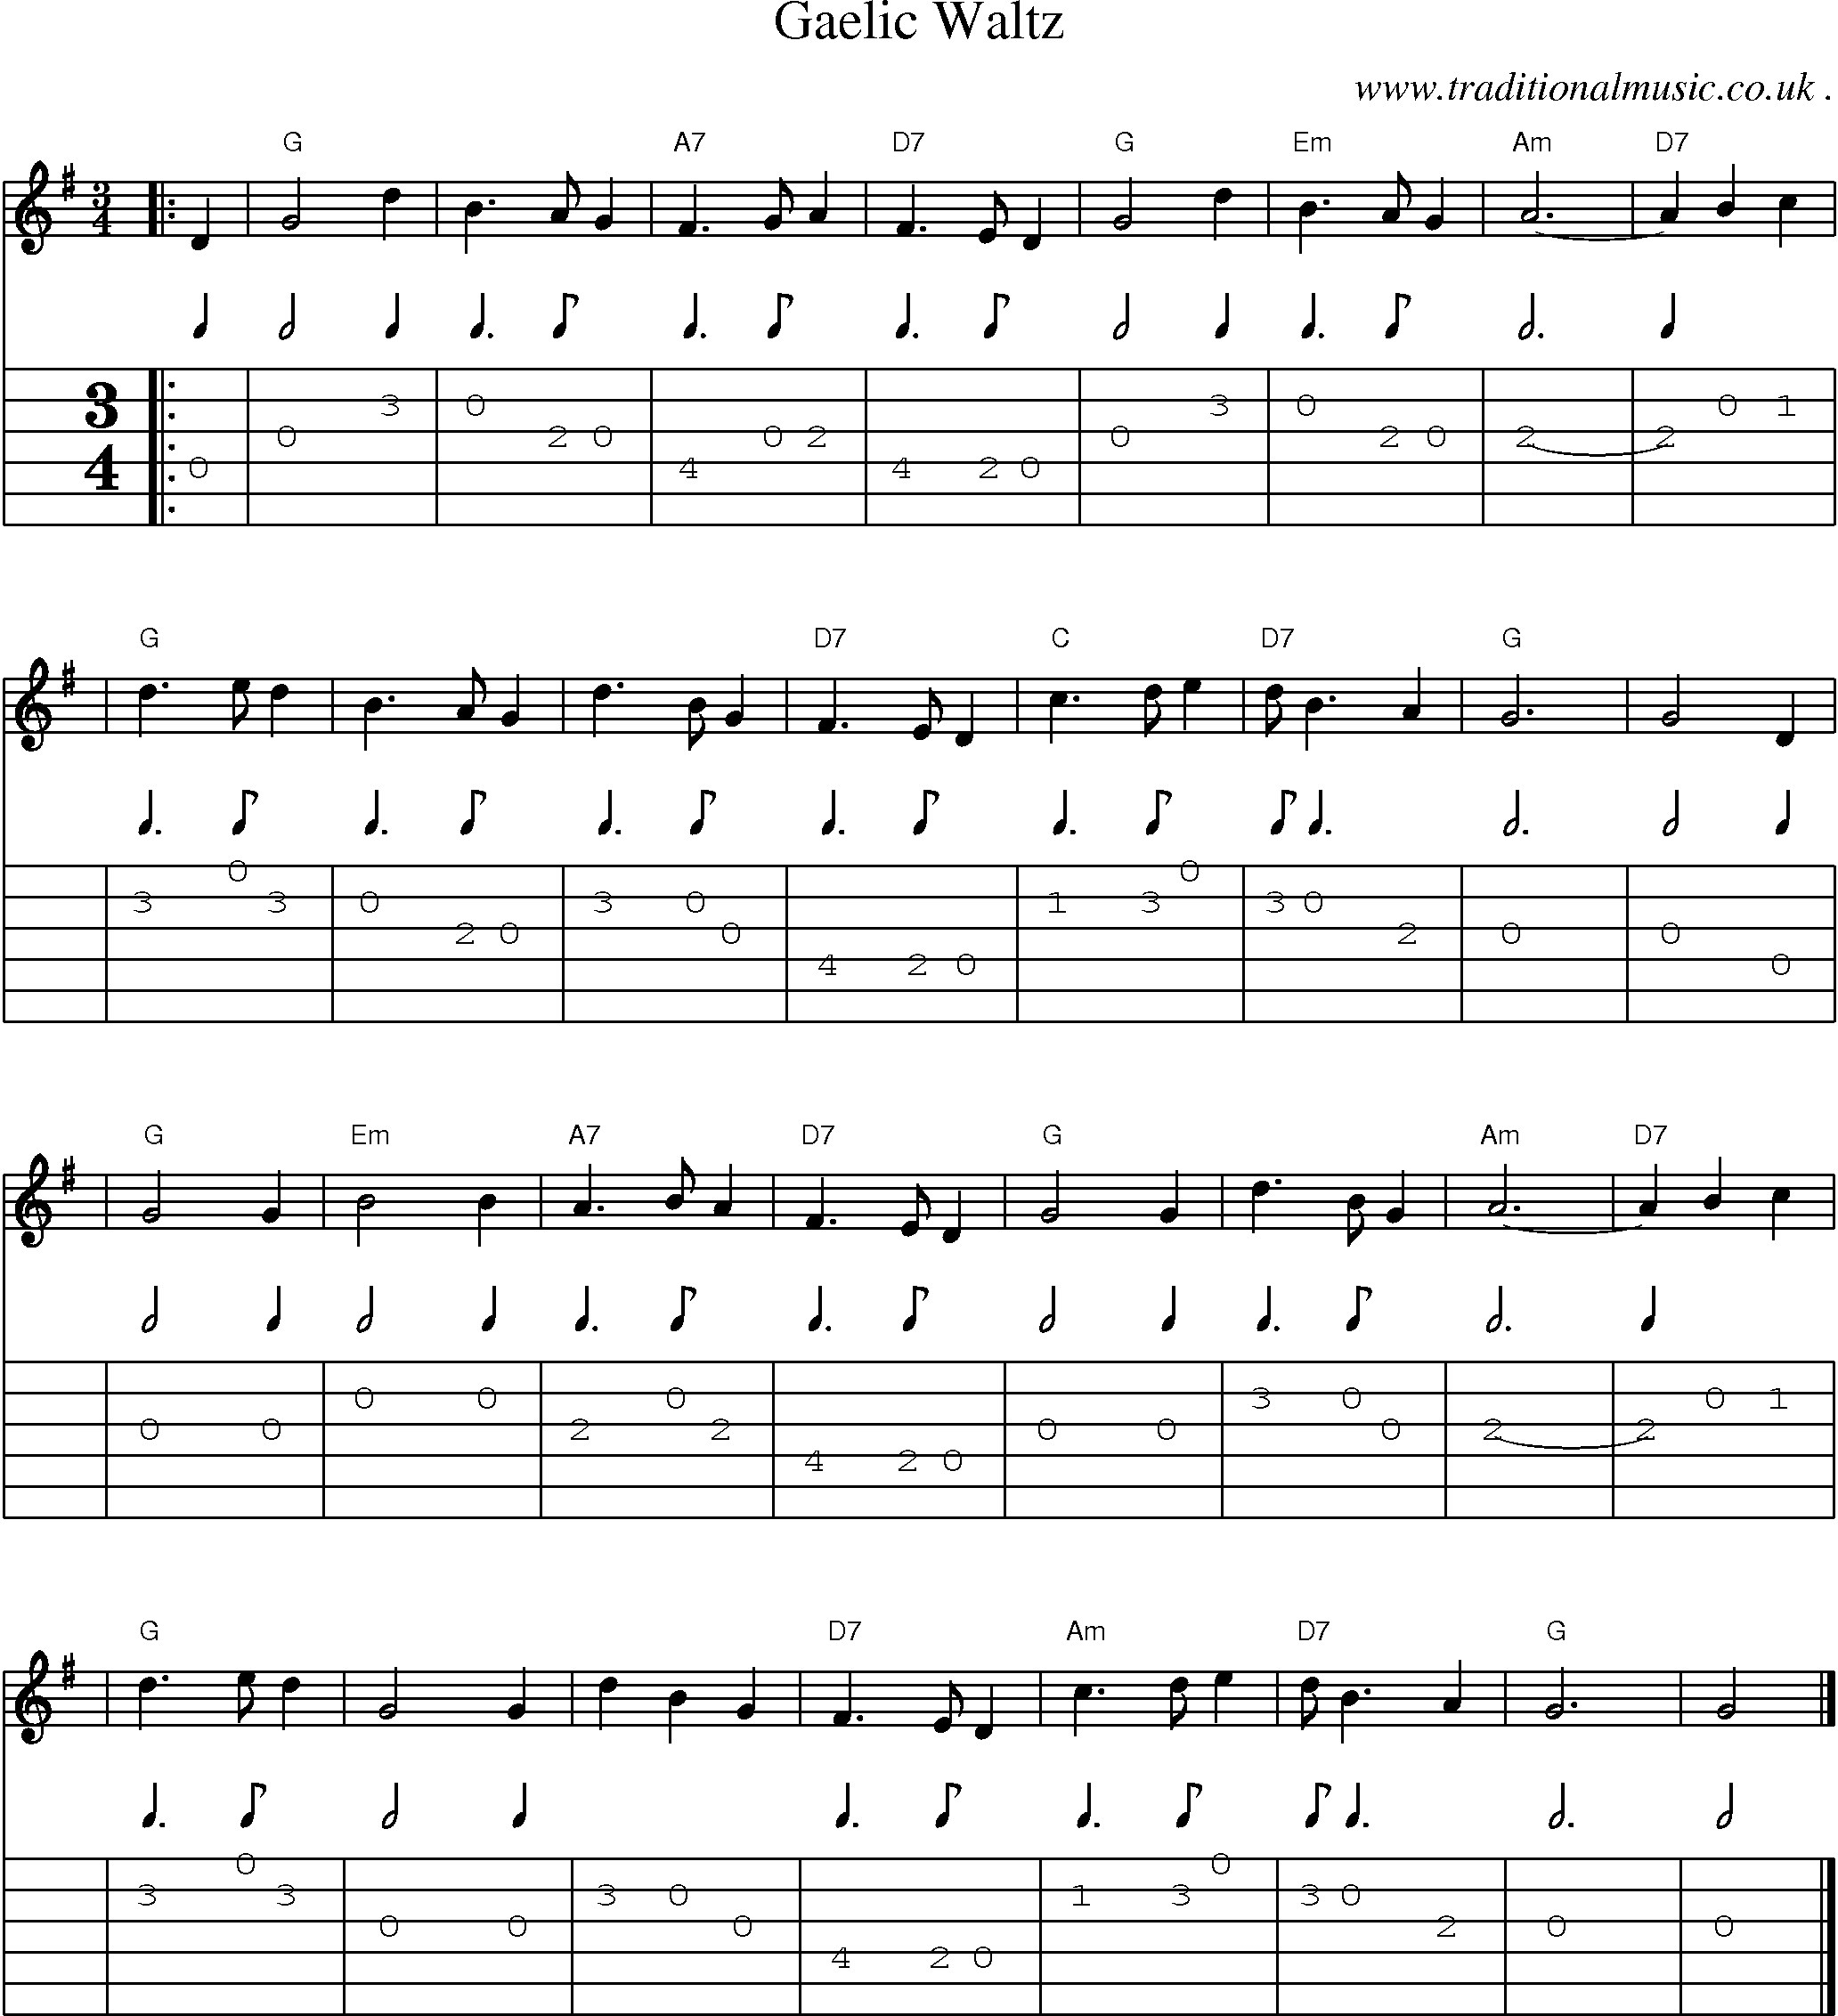 Sheet-music  score, Chords and Guitar Tabs for Gaelic Waltz